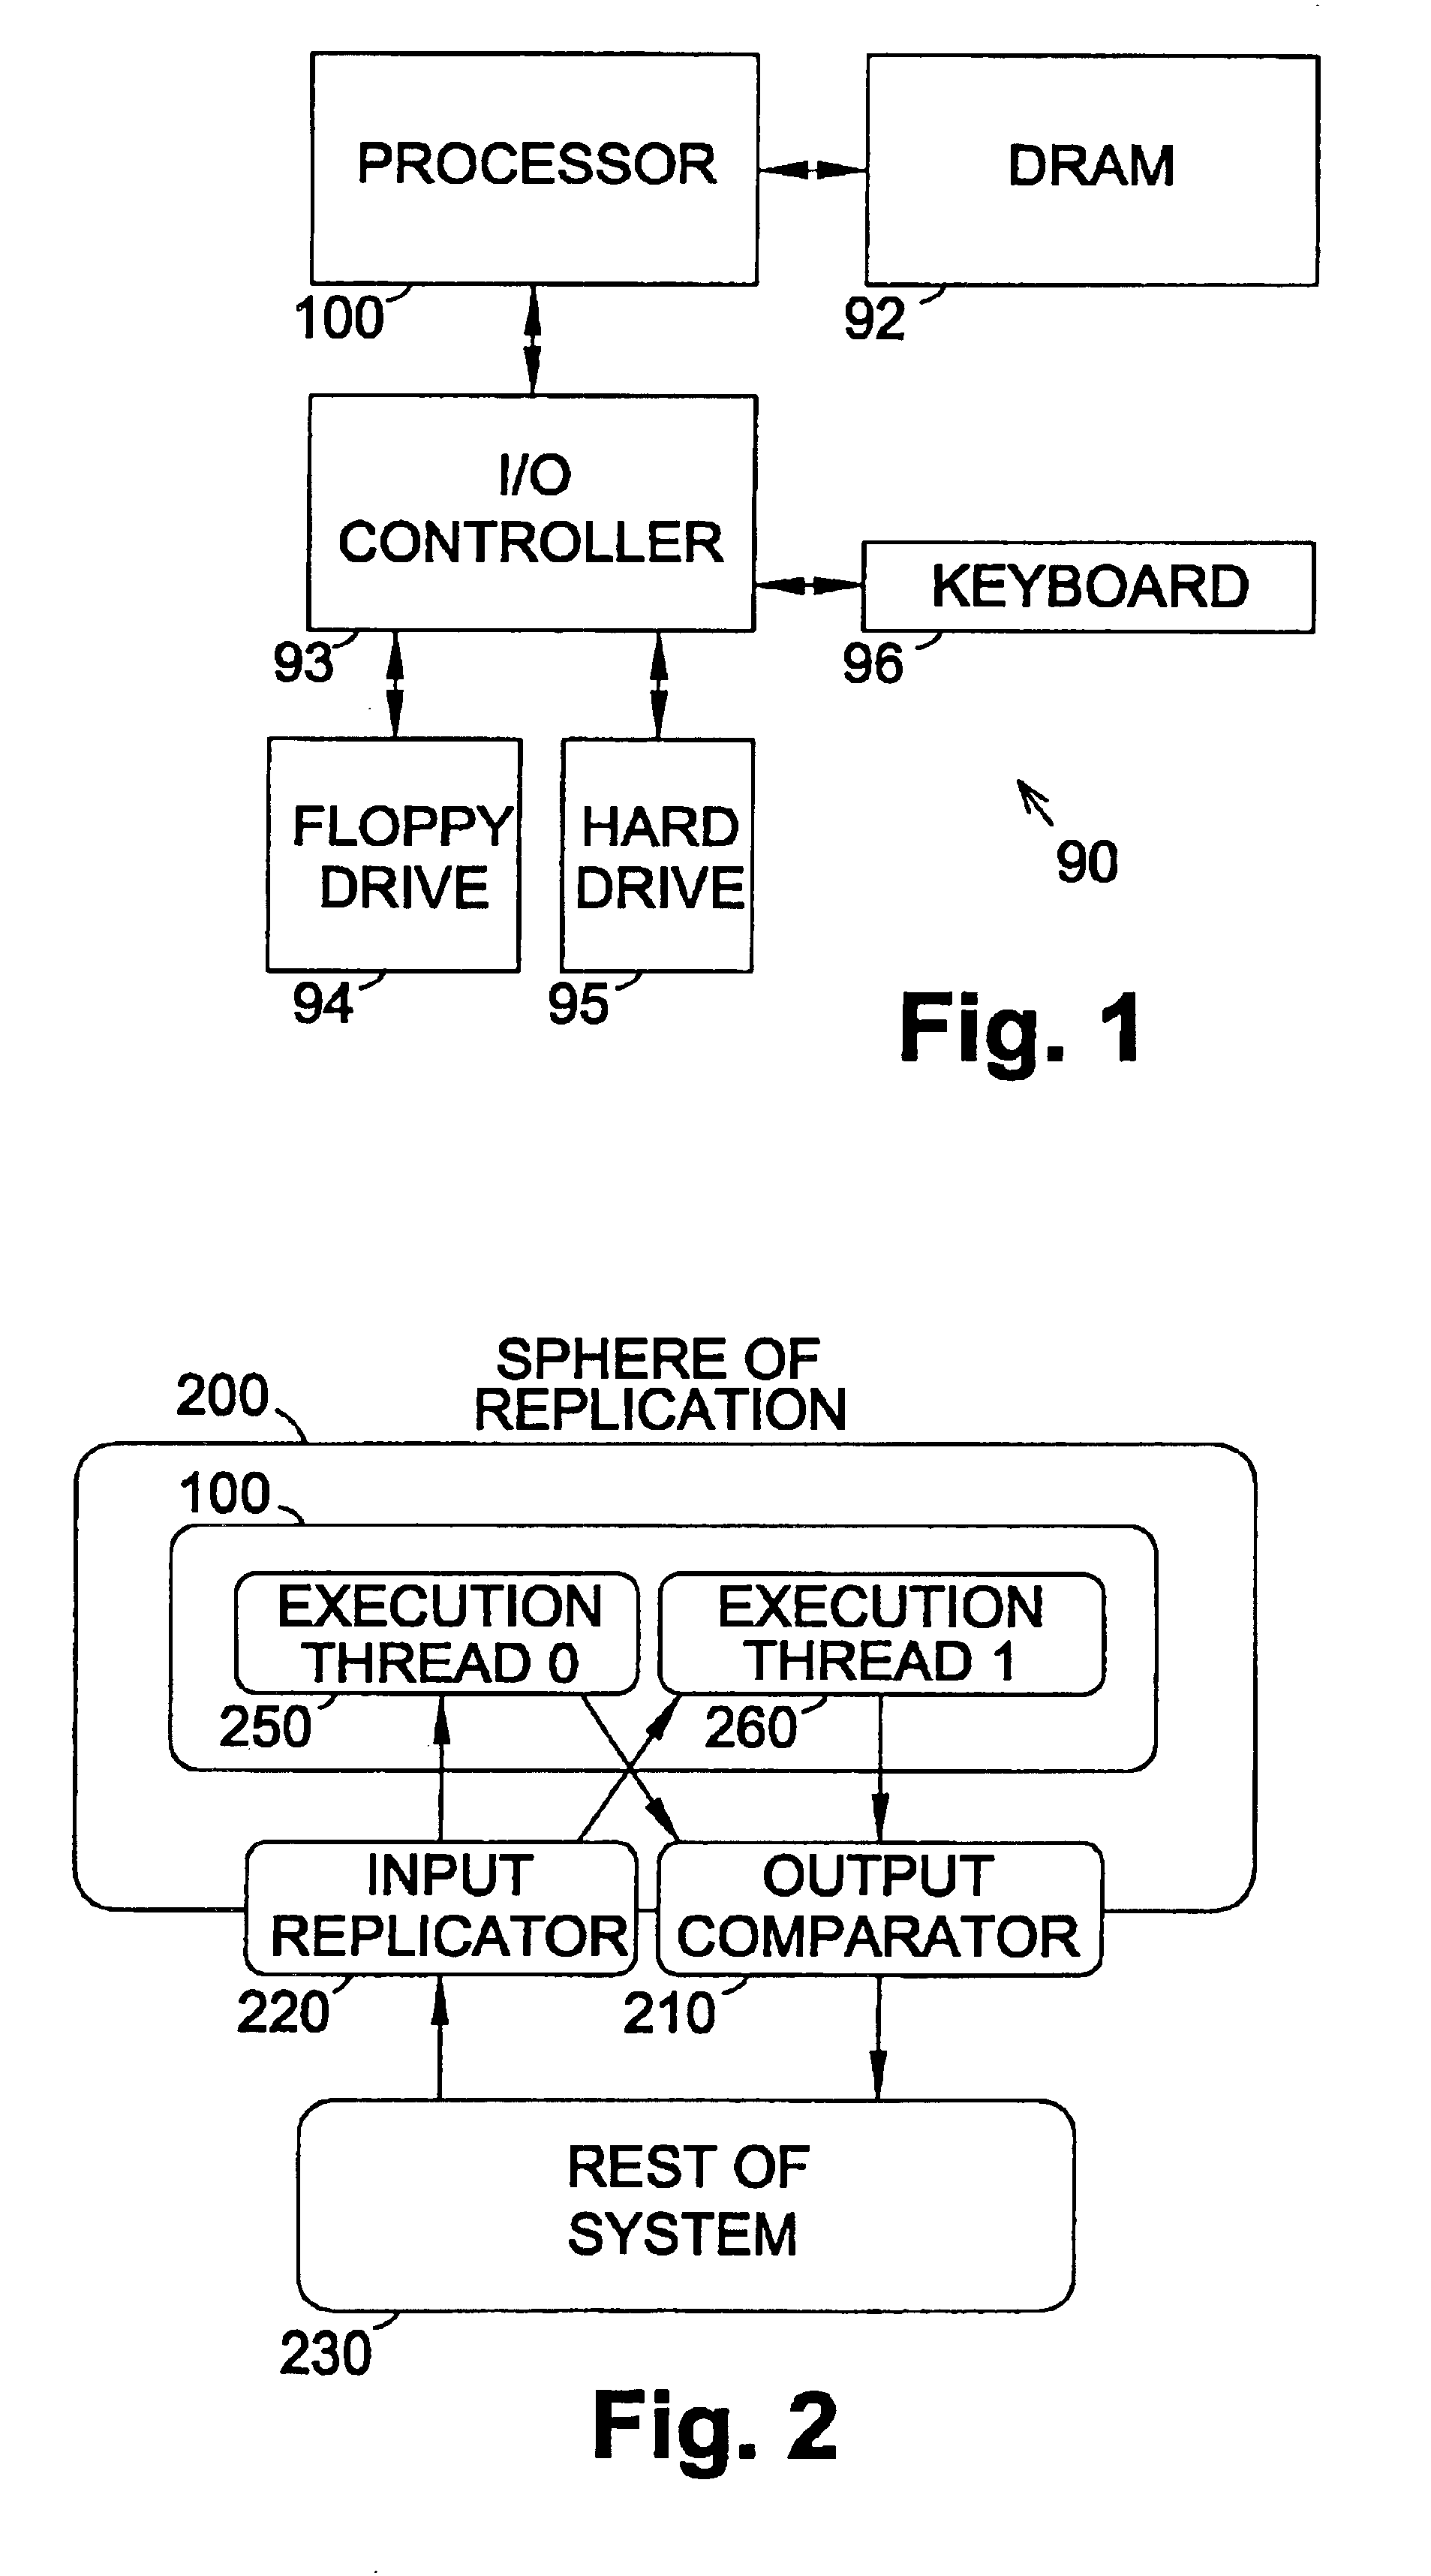 Cycle count replication in a simultaneous and redundantly threaded processor